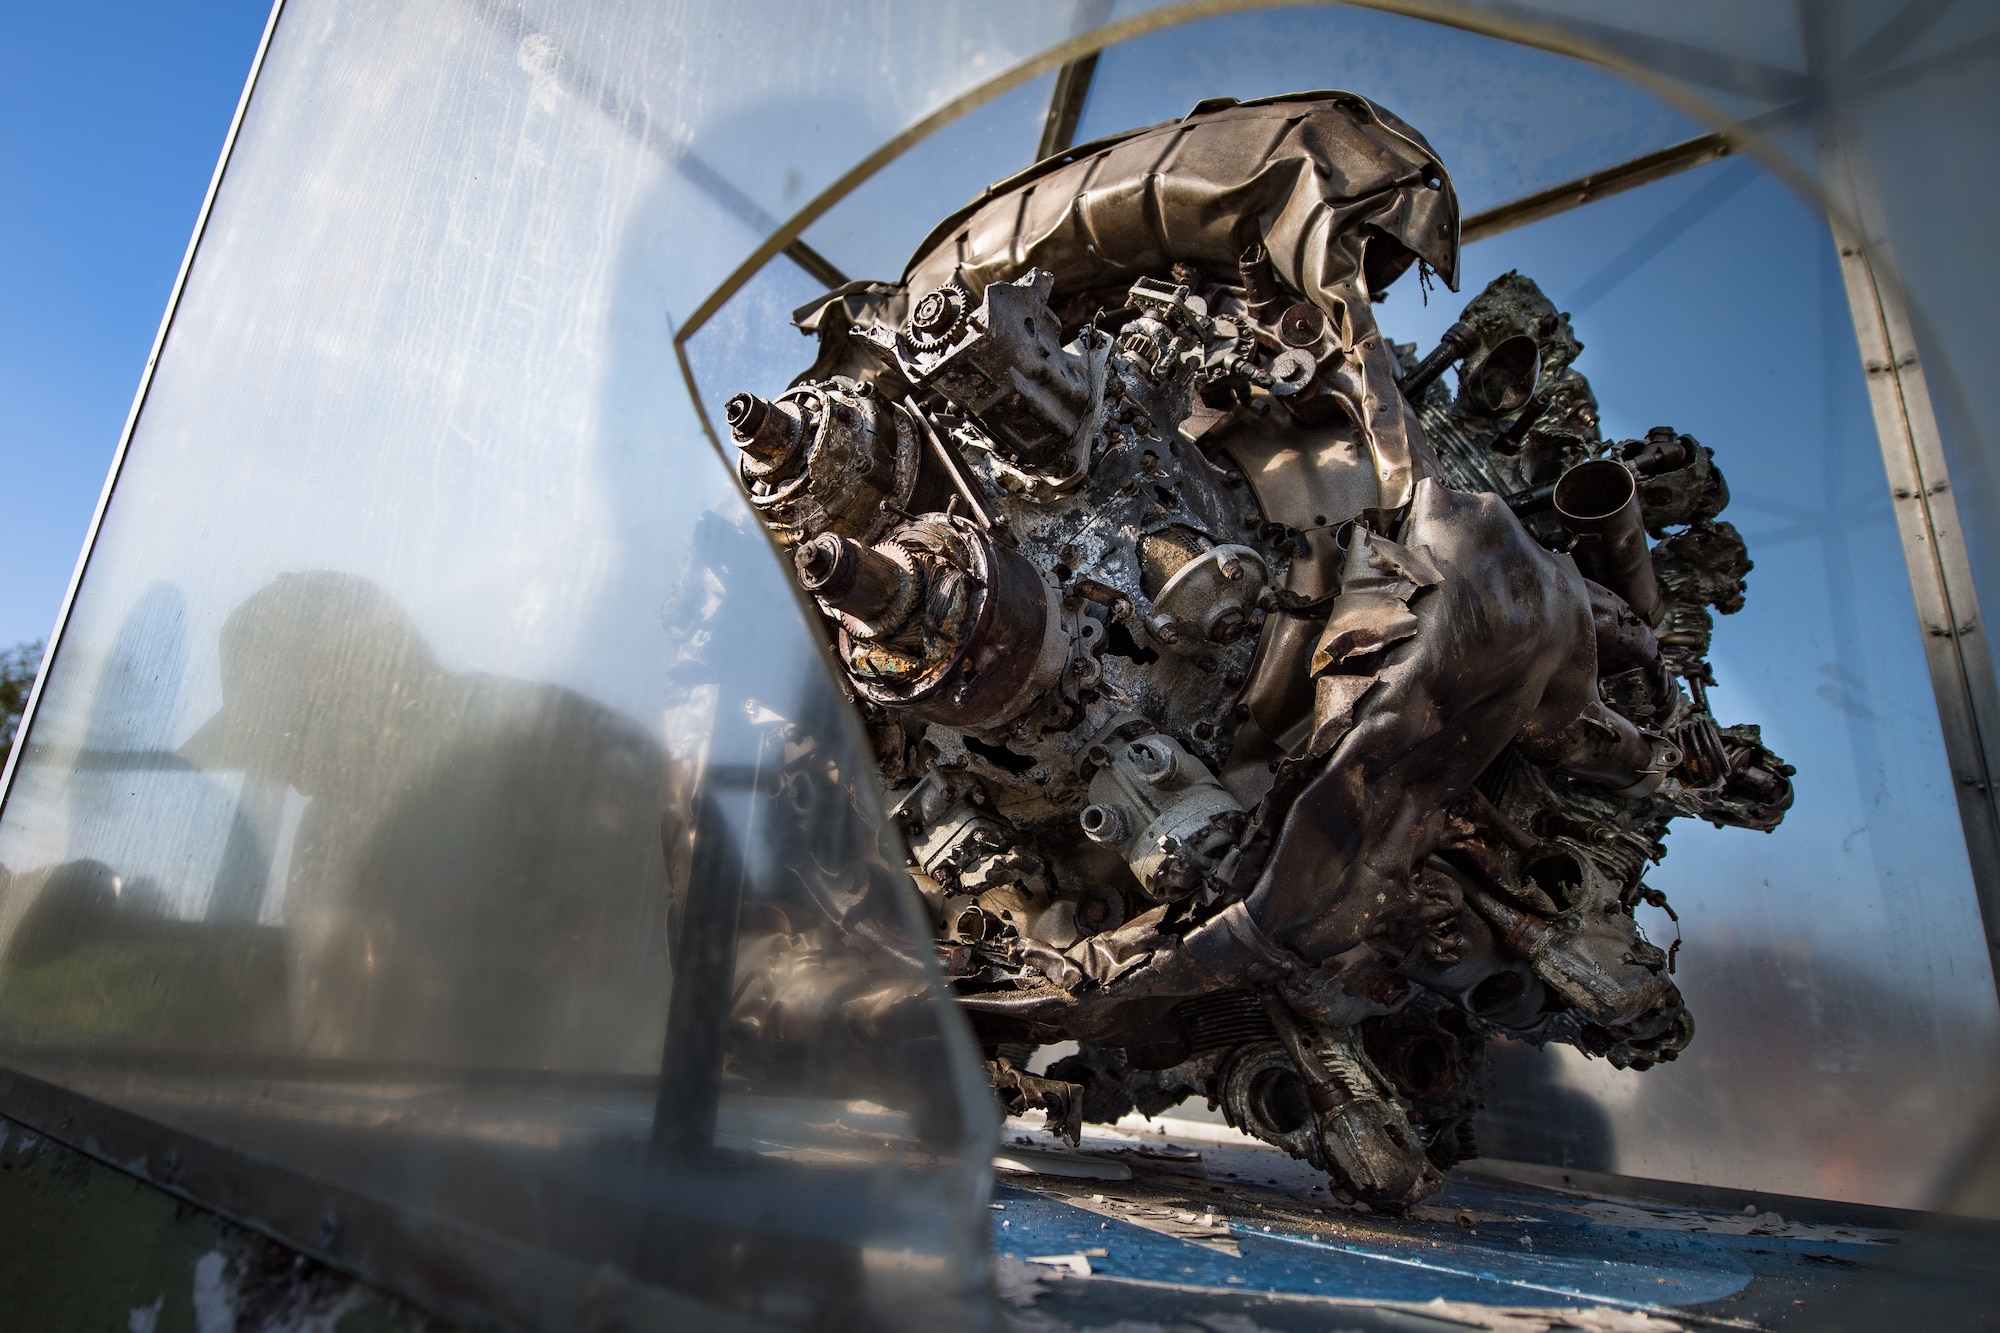 A U.S. Air Force Airman assigned to the 435th Construction Training Squadron, disassembles a display case, housing a WWII aircraft engine, at a memorial in Picauville, France, April 30, 2019. The 435th CTS Airmen spent several hours building a new case, removing the old one, and re-painting parts of the display. (U.S. Air Force photo by Staff Sgt. Devin Boyer)